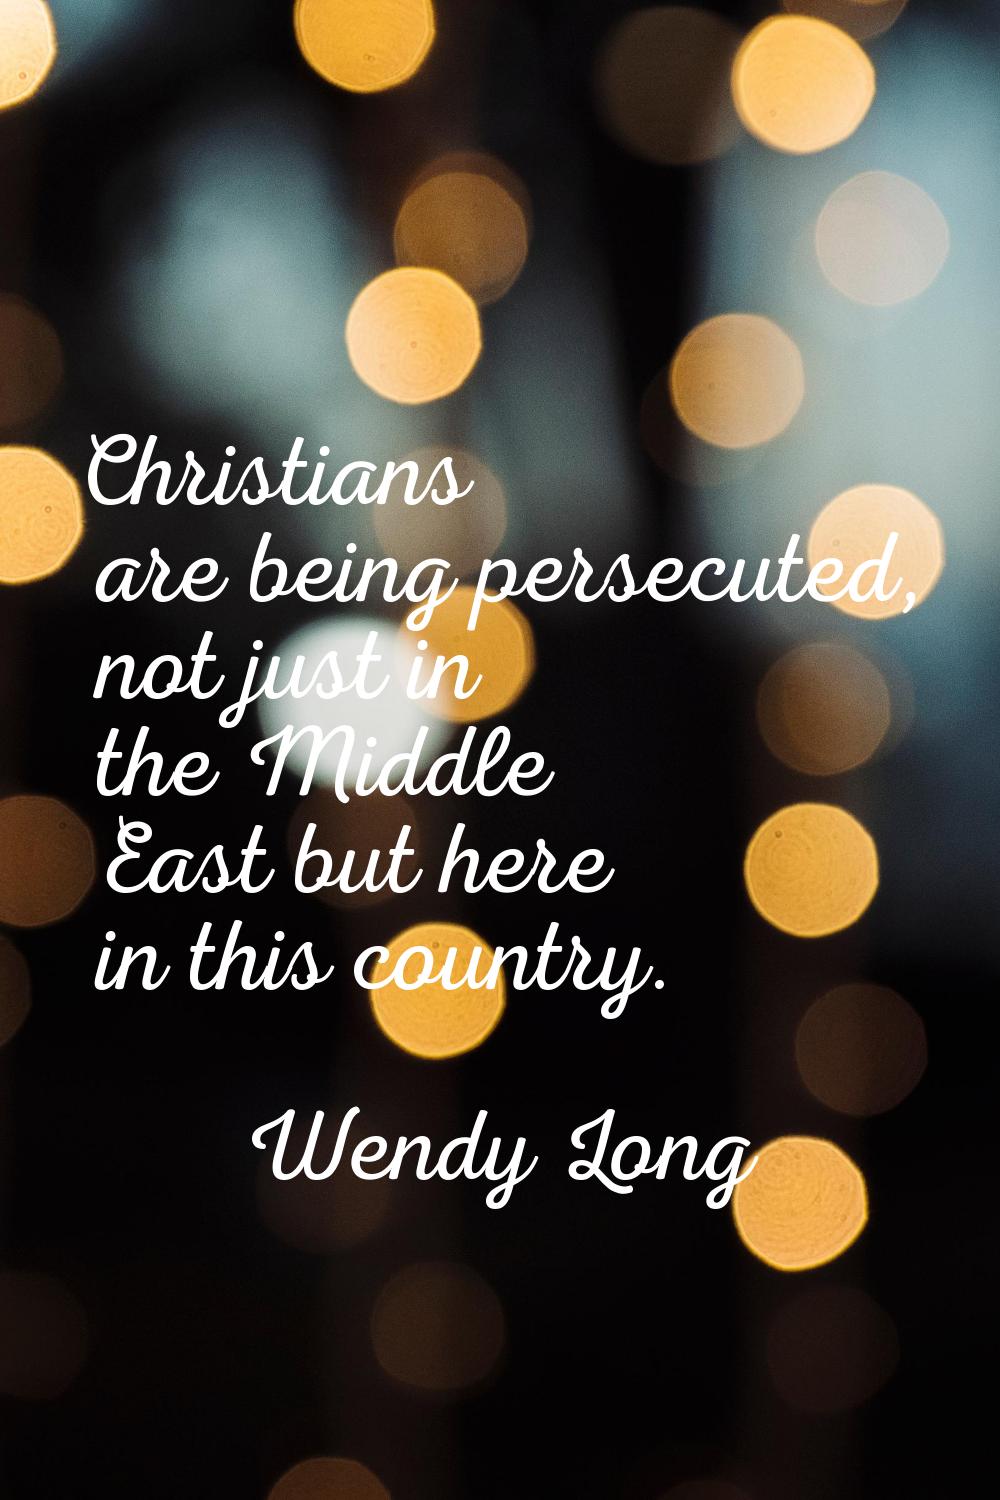 Christians are being persecuted, not just in the Middle East but here in this country.